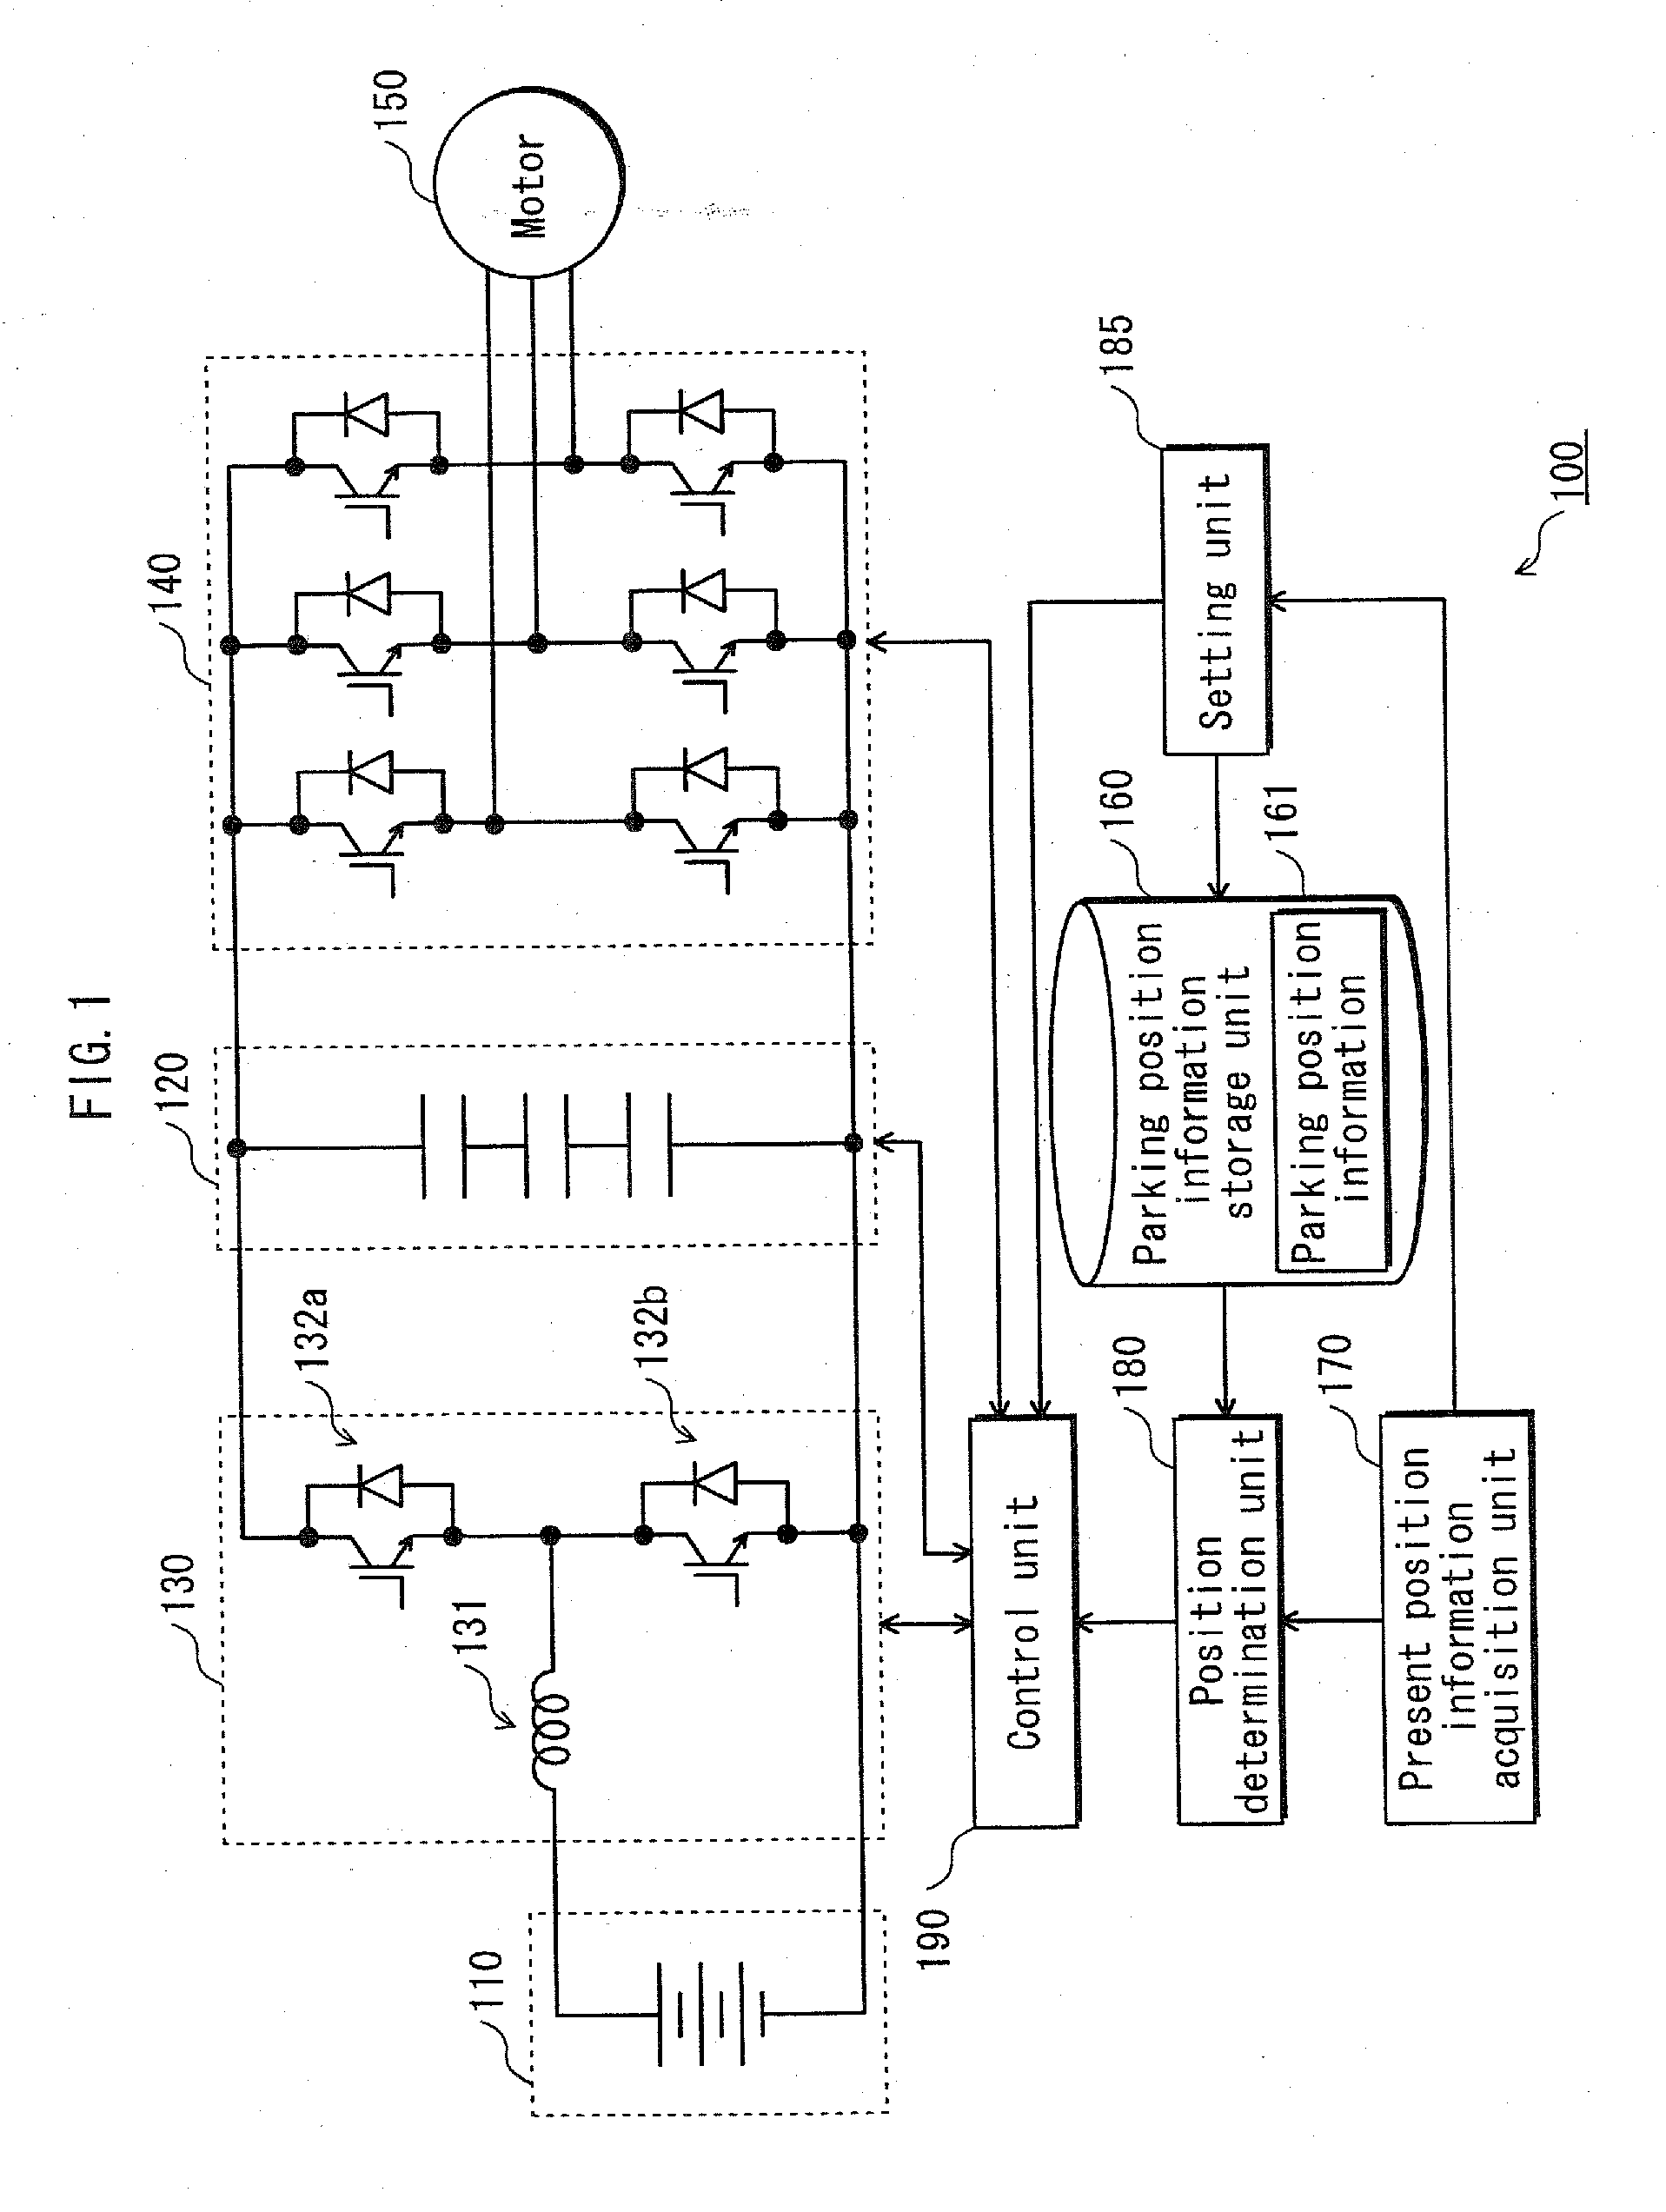 Vehicle control system and automobile